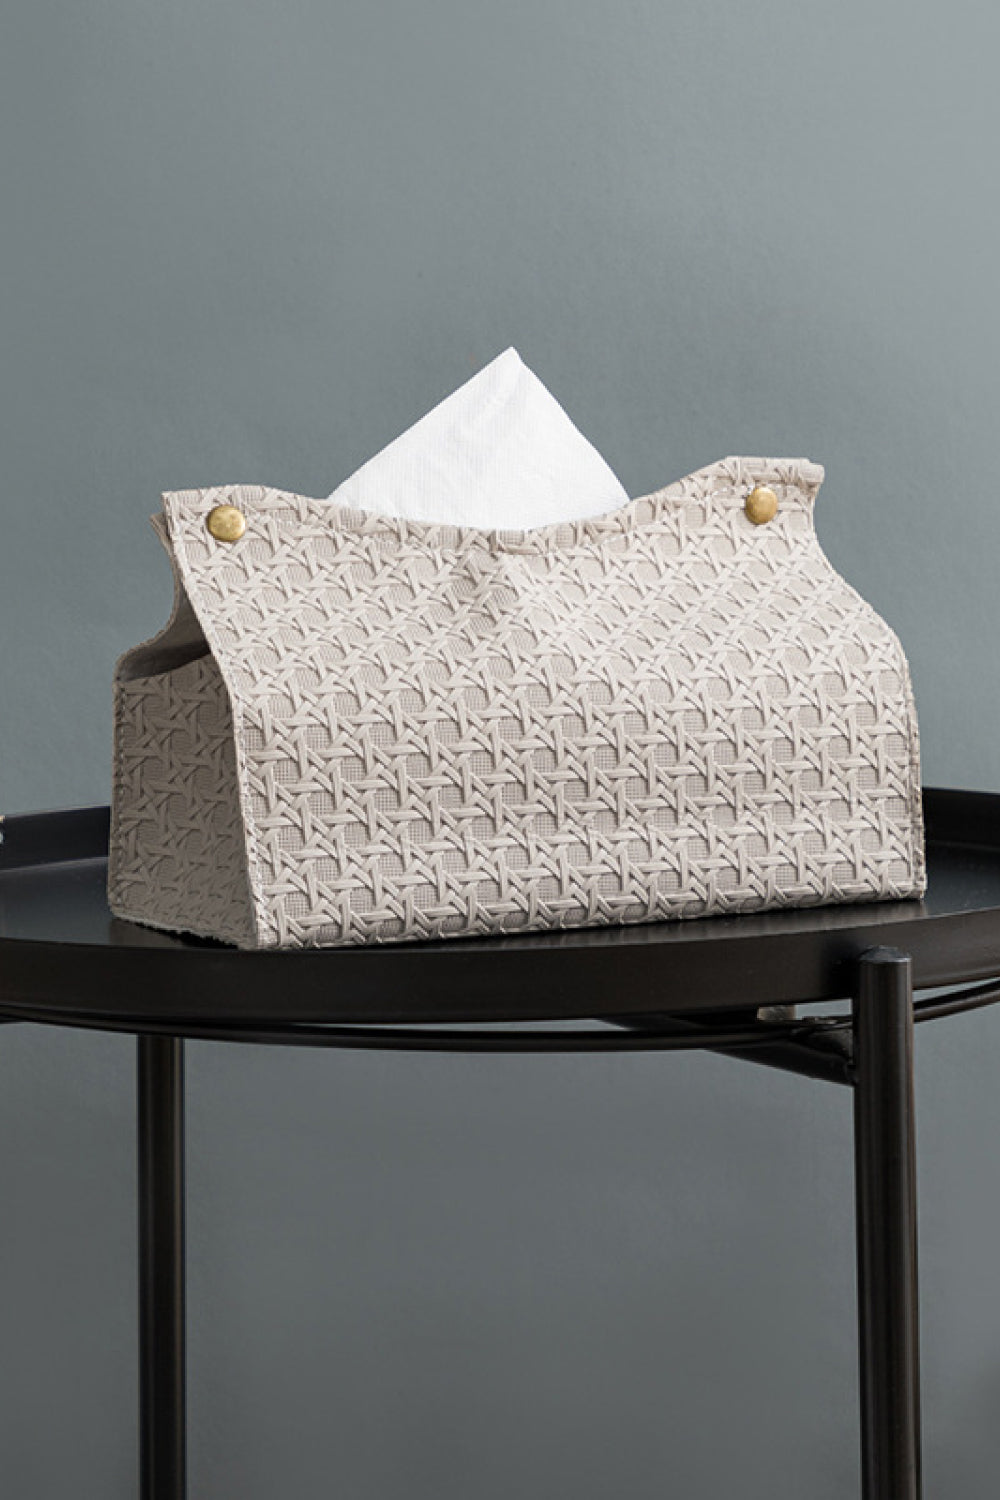 Woven Tissue Box Covers